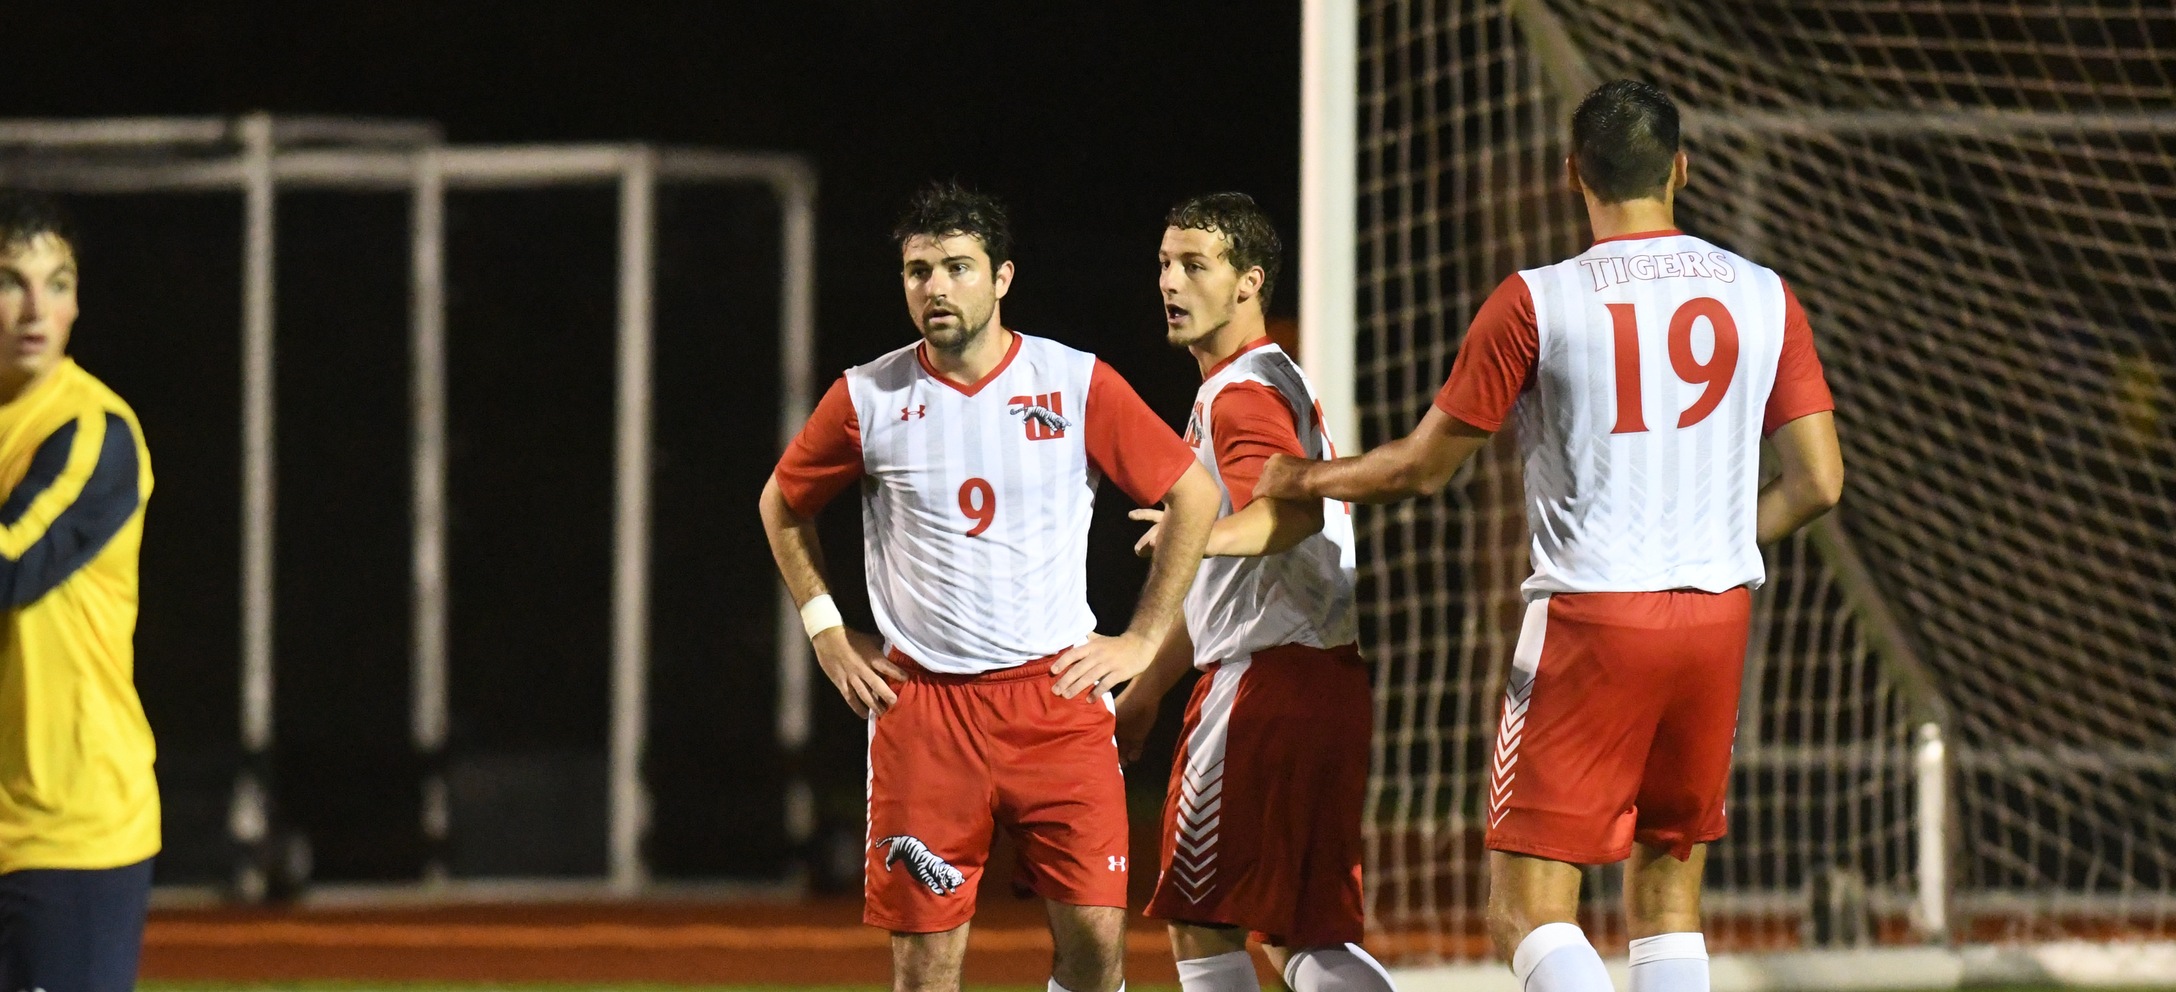 Wittenberg Men's Soccer Unable To Take Down DePauw